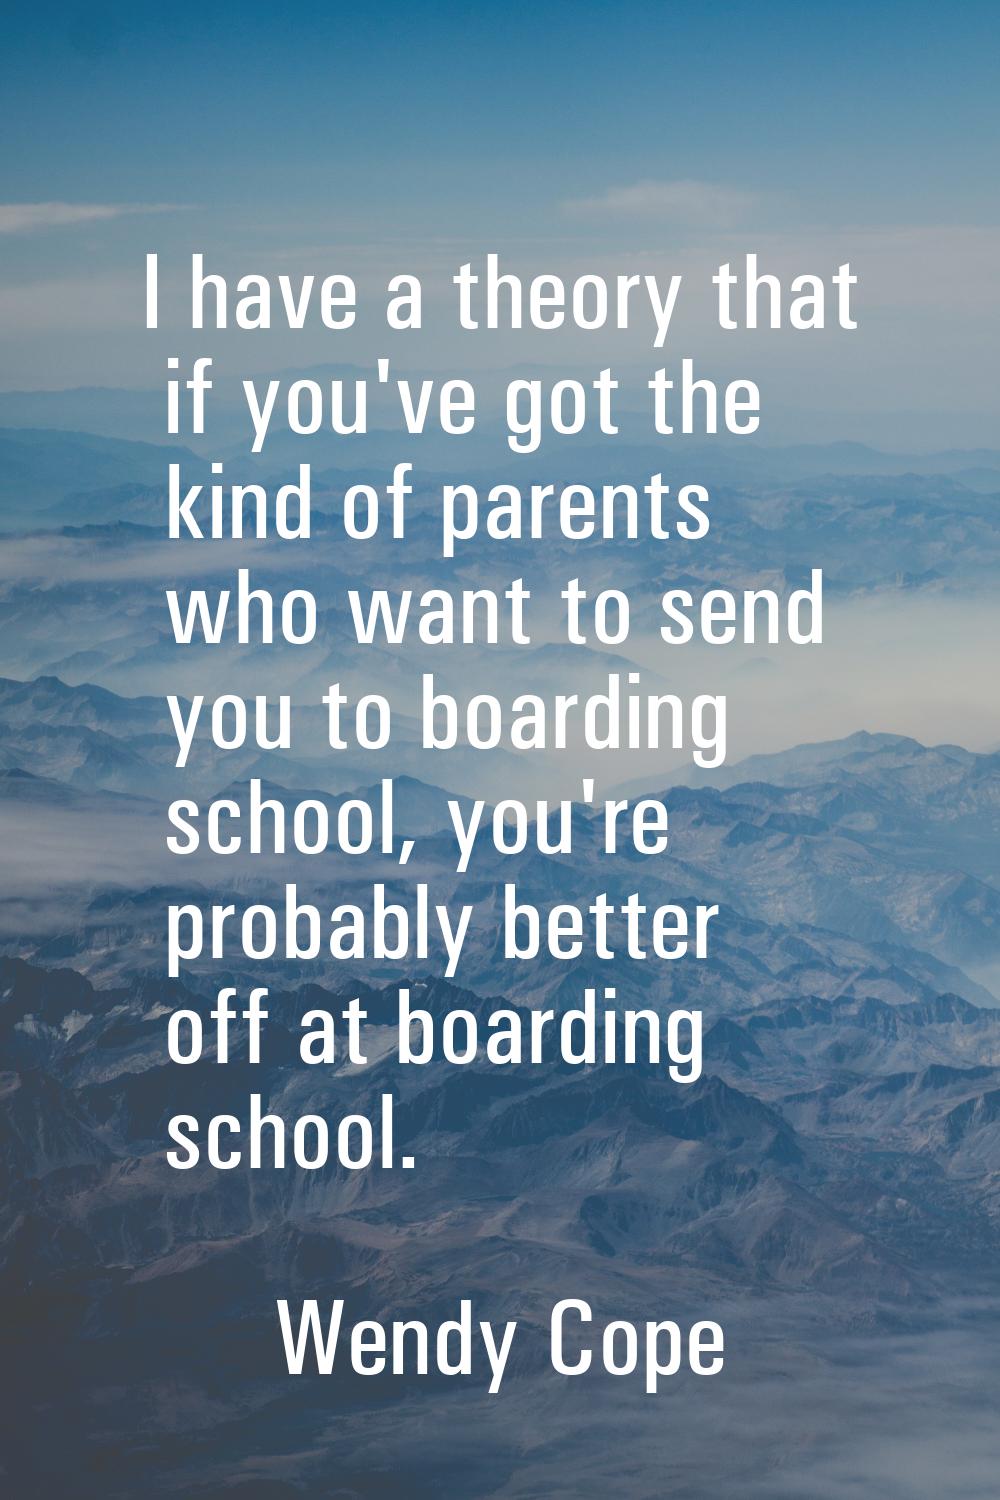 I have a theory that if you've got the kind of parents who want to send you to boarding school, you